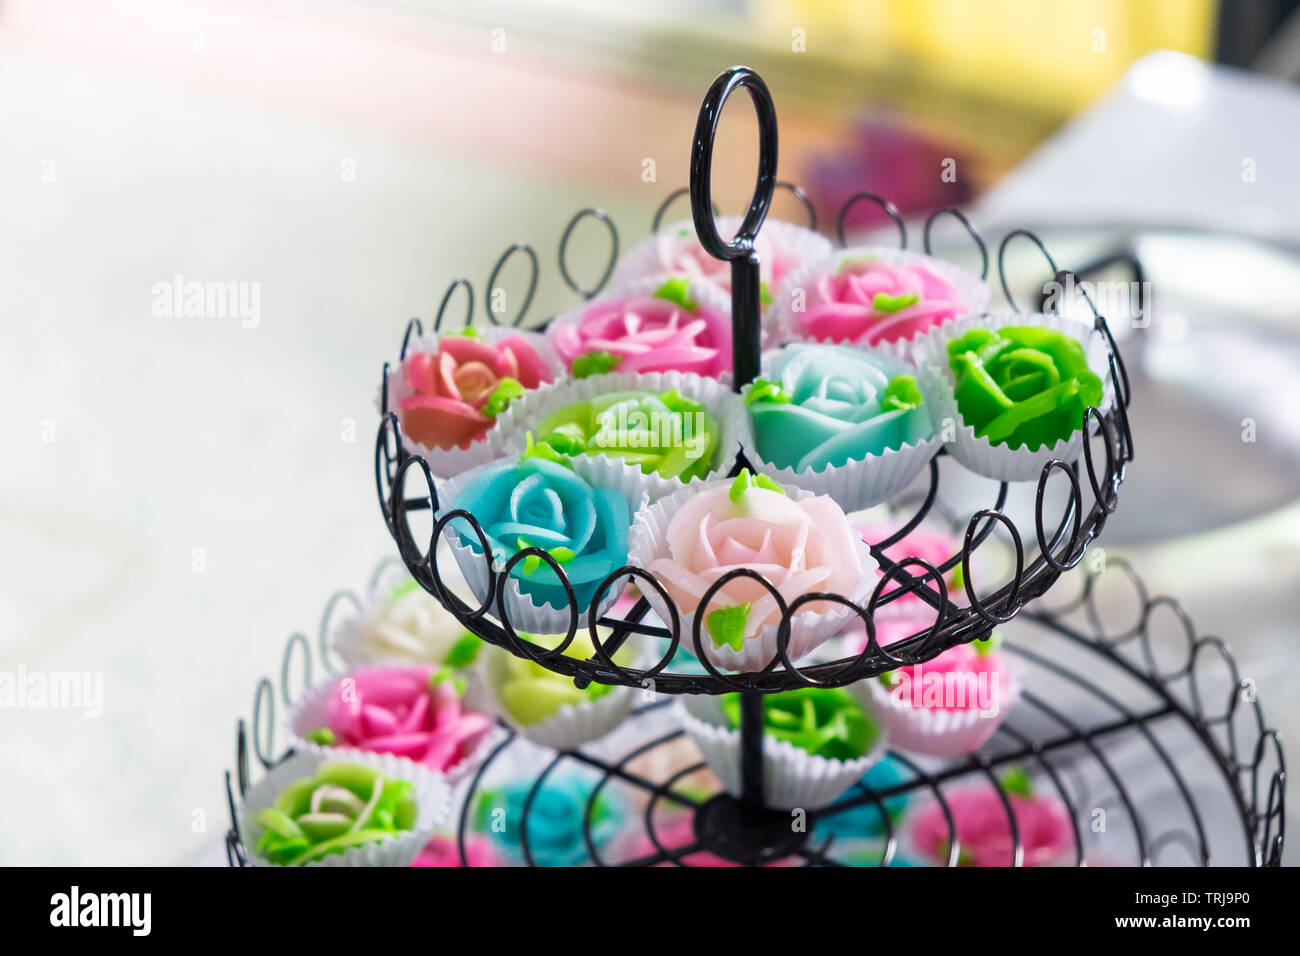 Thai dessert sweet shape rose aalaw,allure colorful on tray decoration  Stock Photo - Alamy